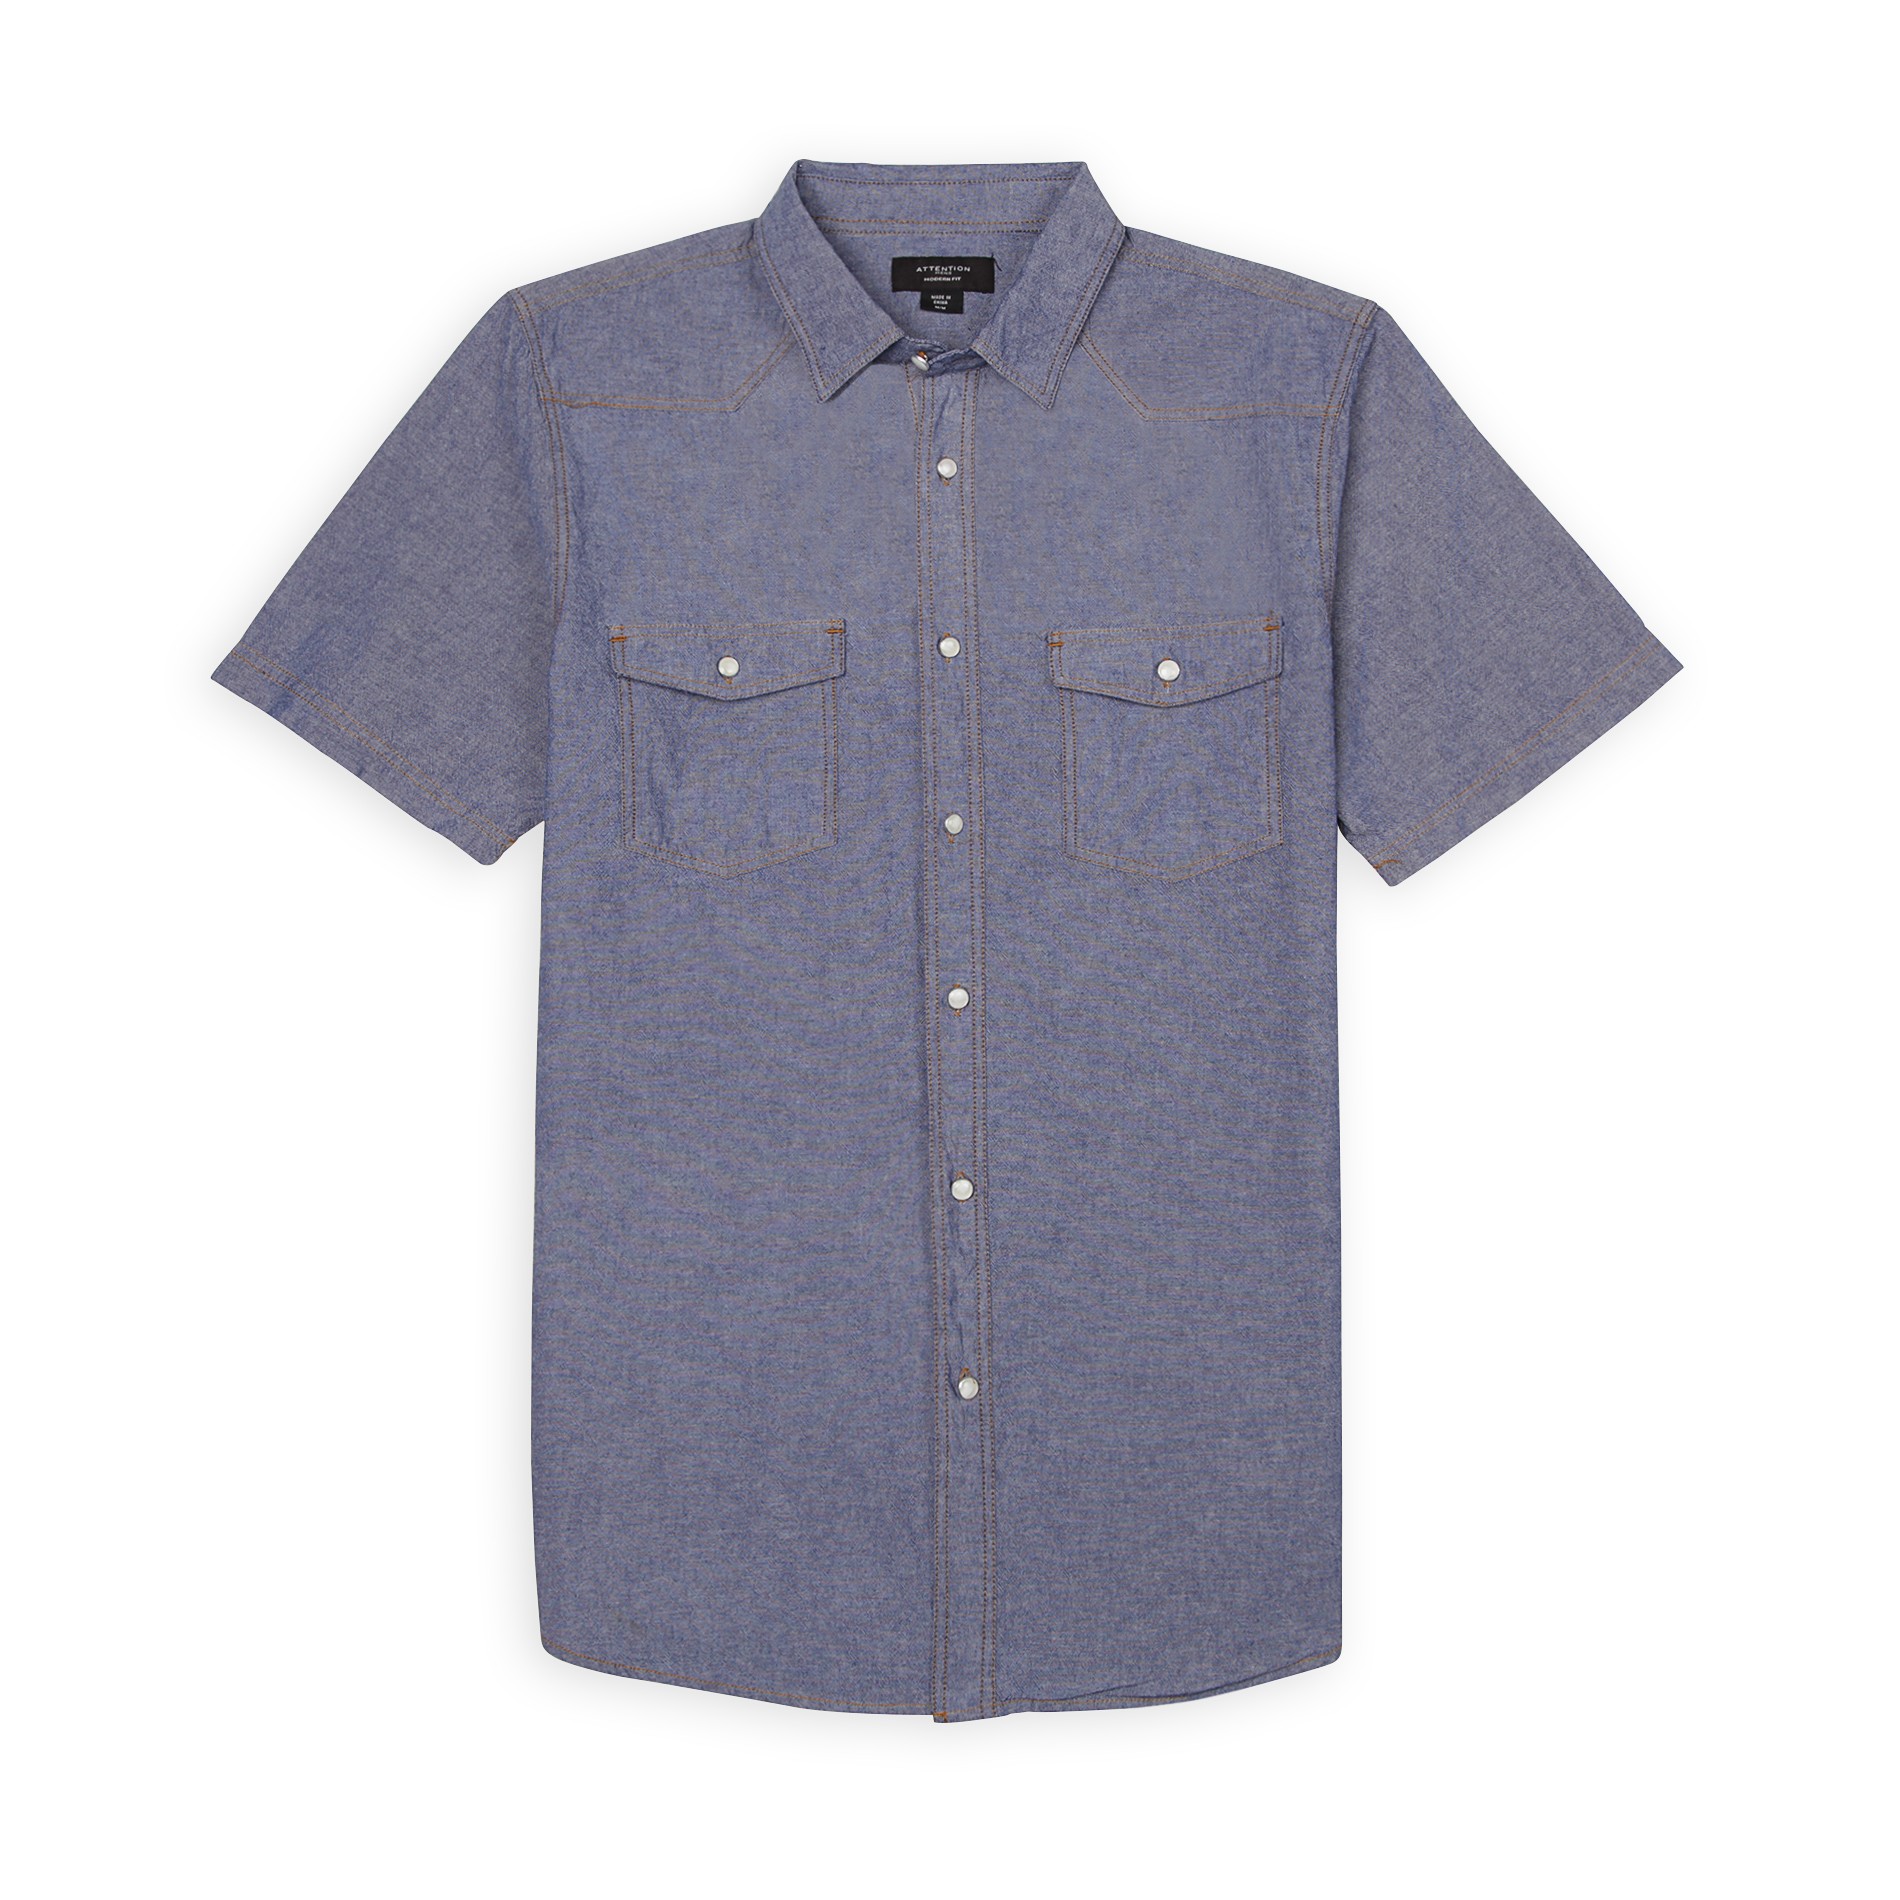 Attention Men's Casual Button-Front Shirt